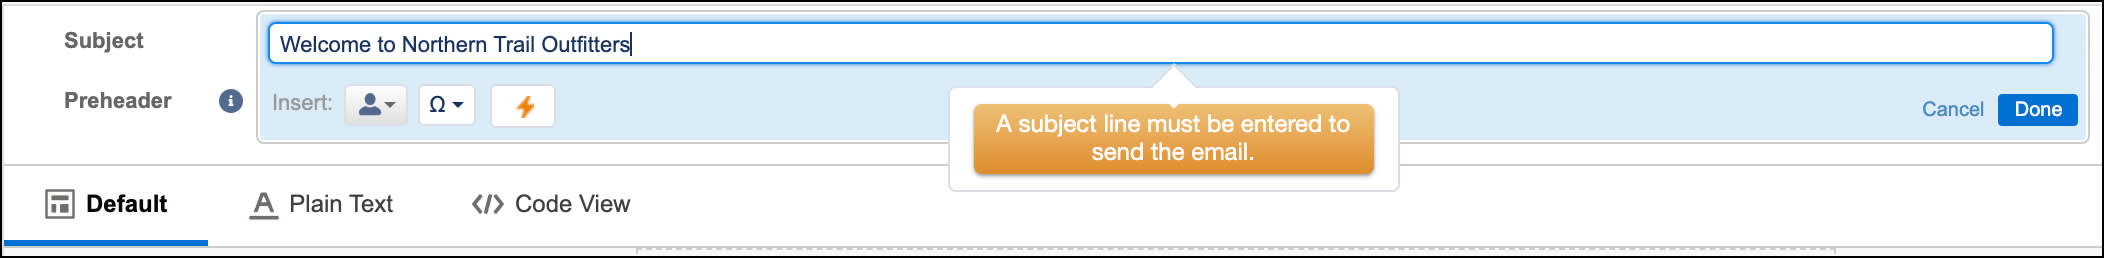 A screen shot showing a red arrow pointing to the Save button in the bottom right hand corner of the Subject line box.